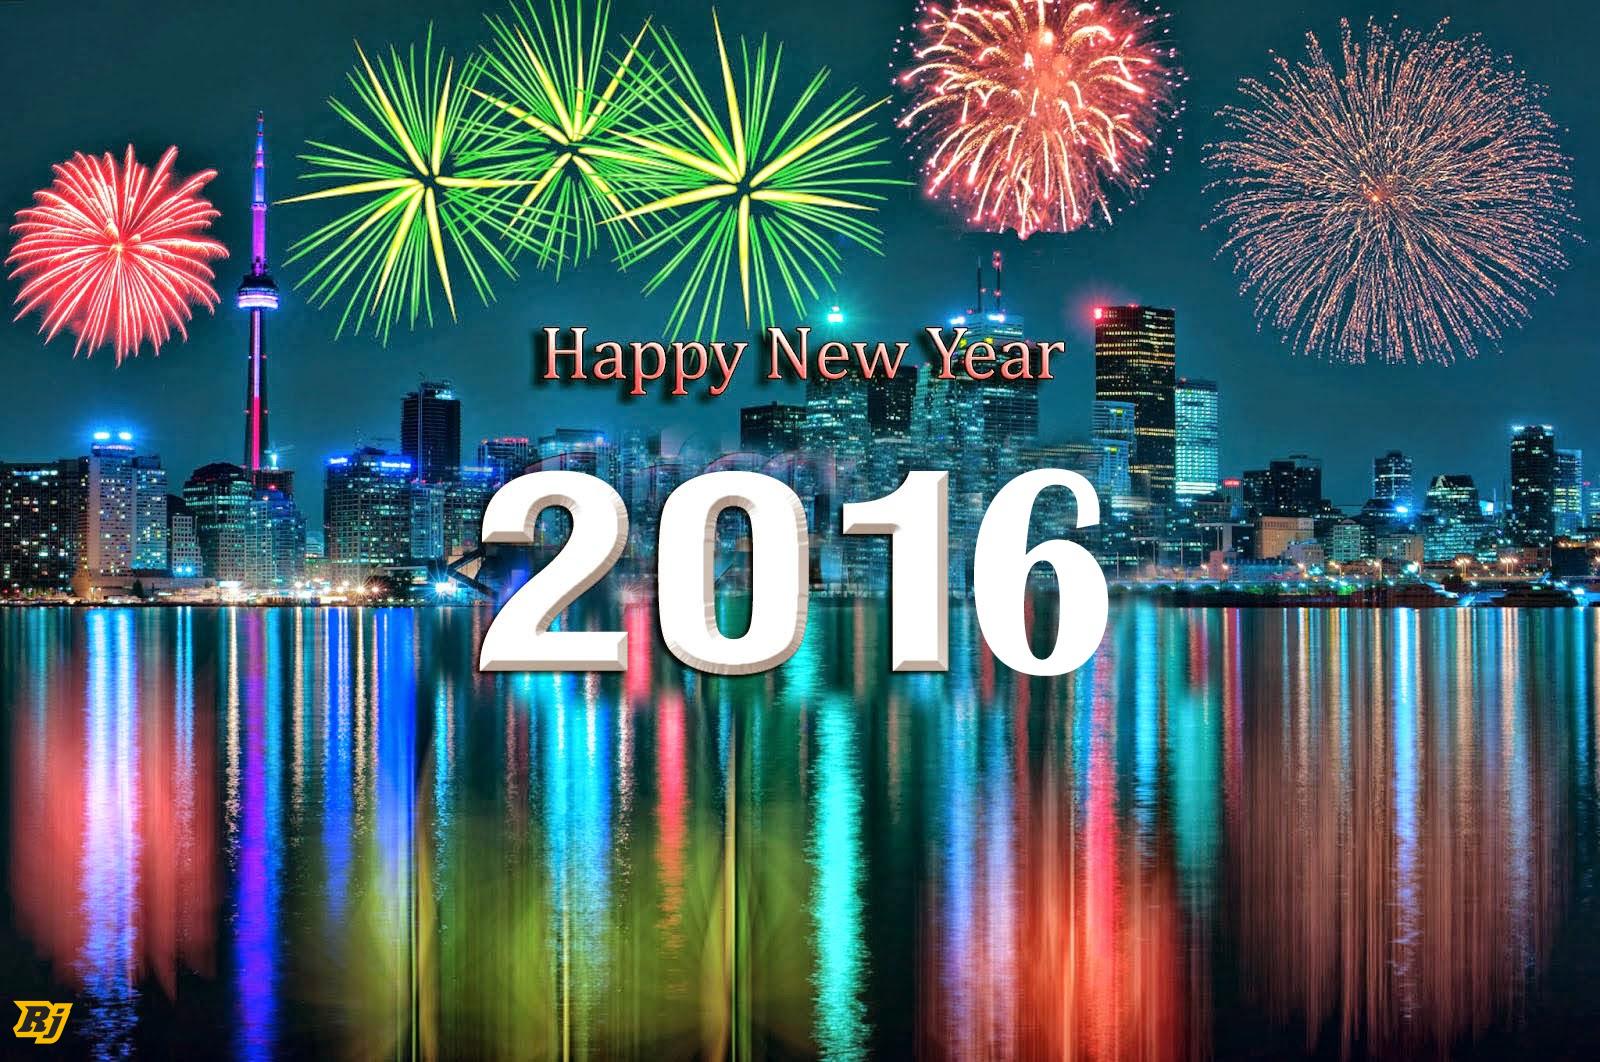 happy new year 2016 images new year 2016 hd wallpaper